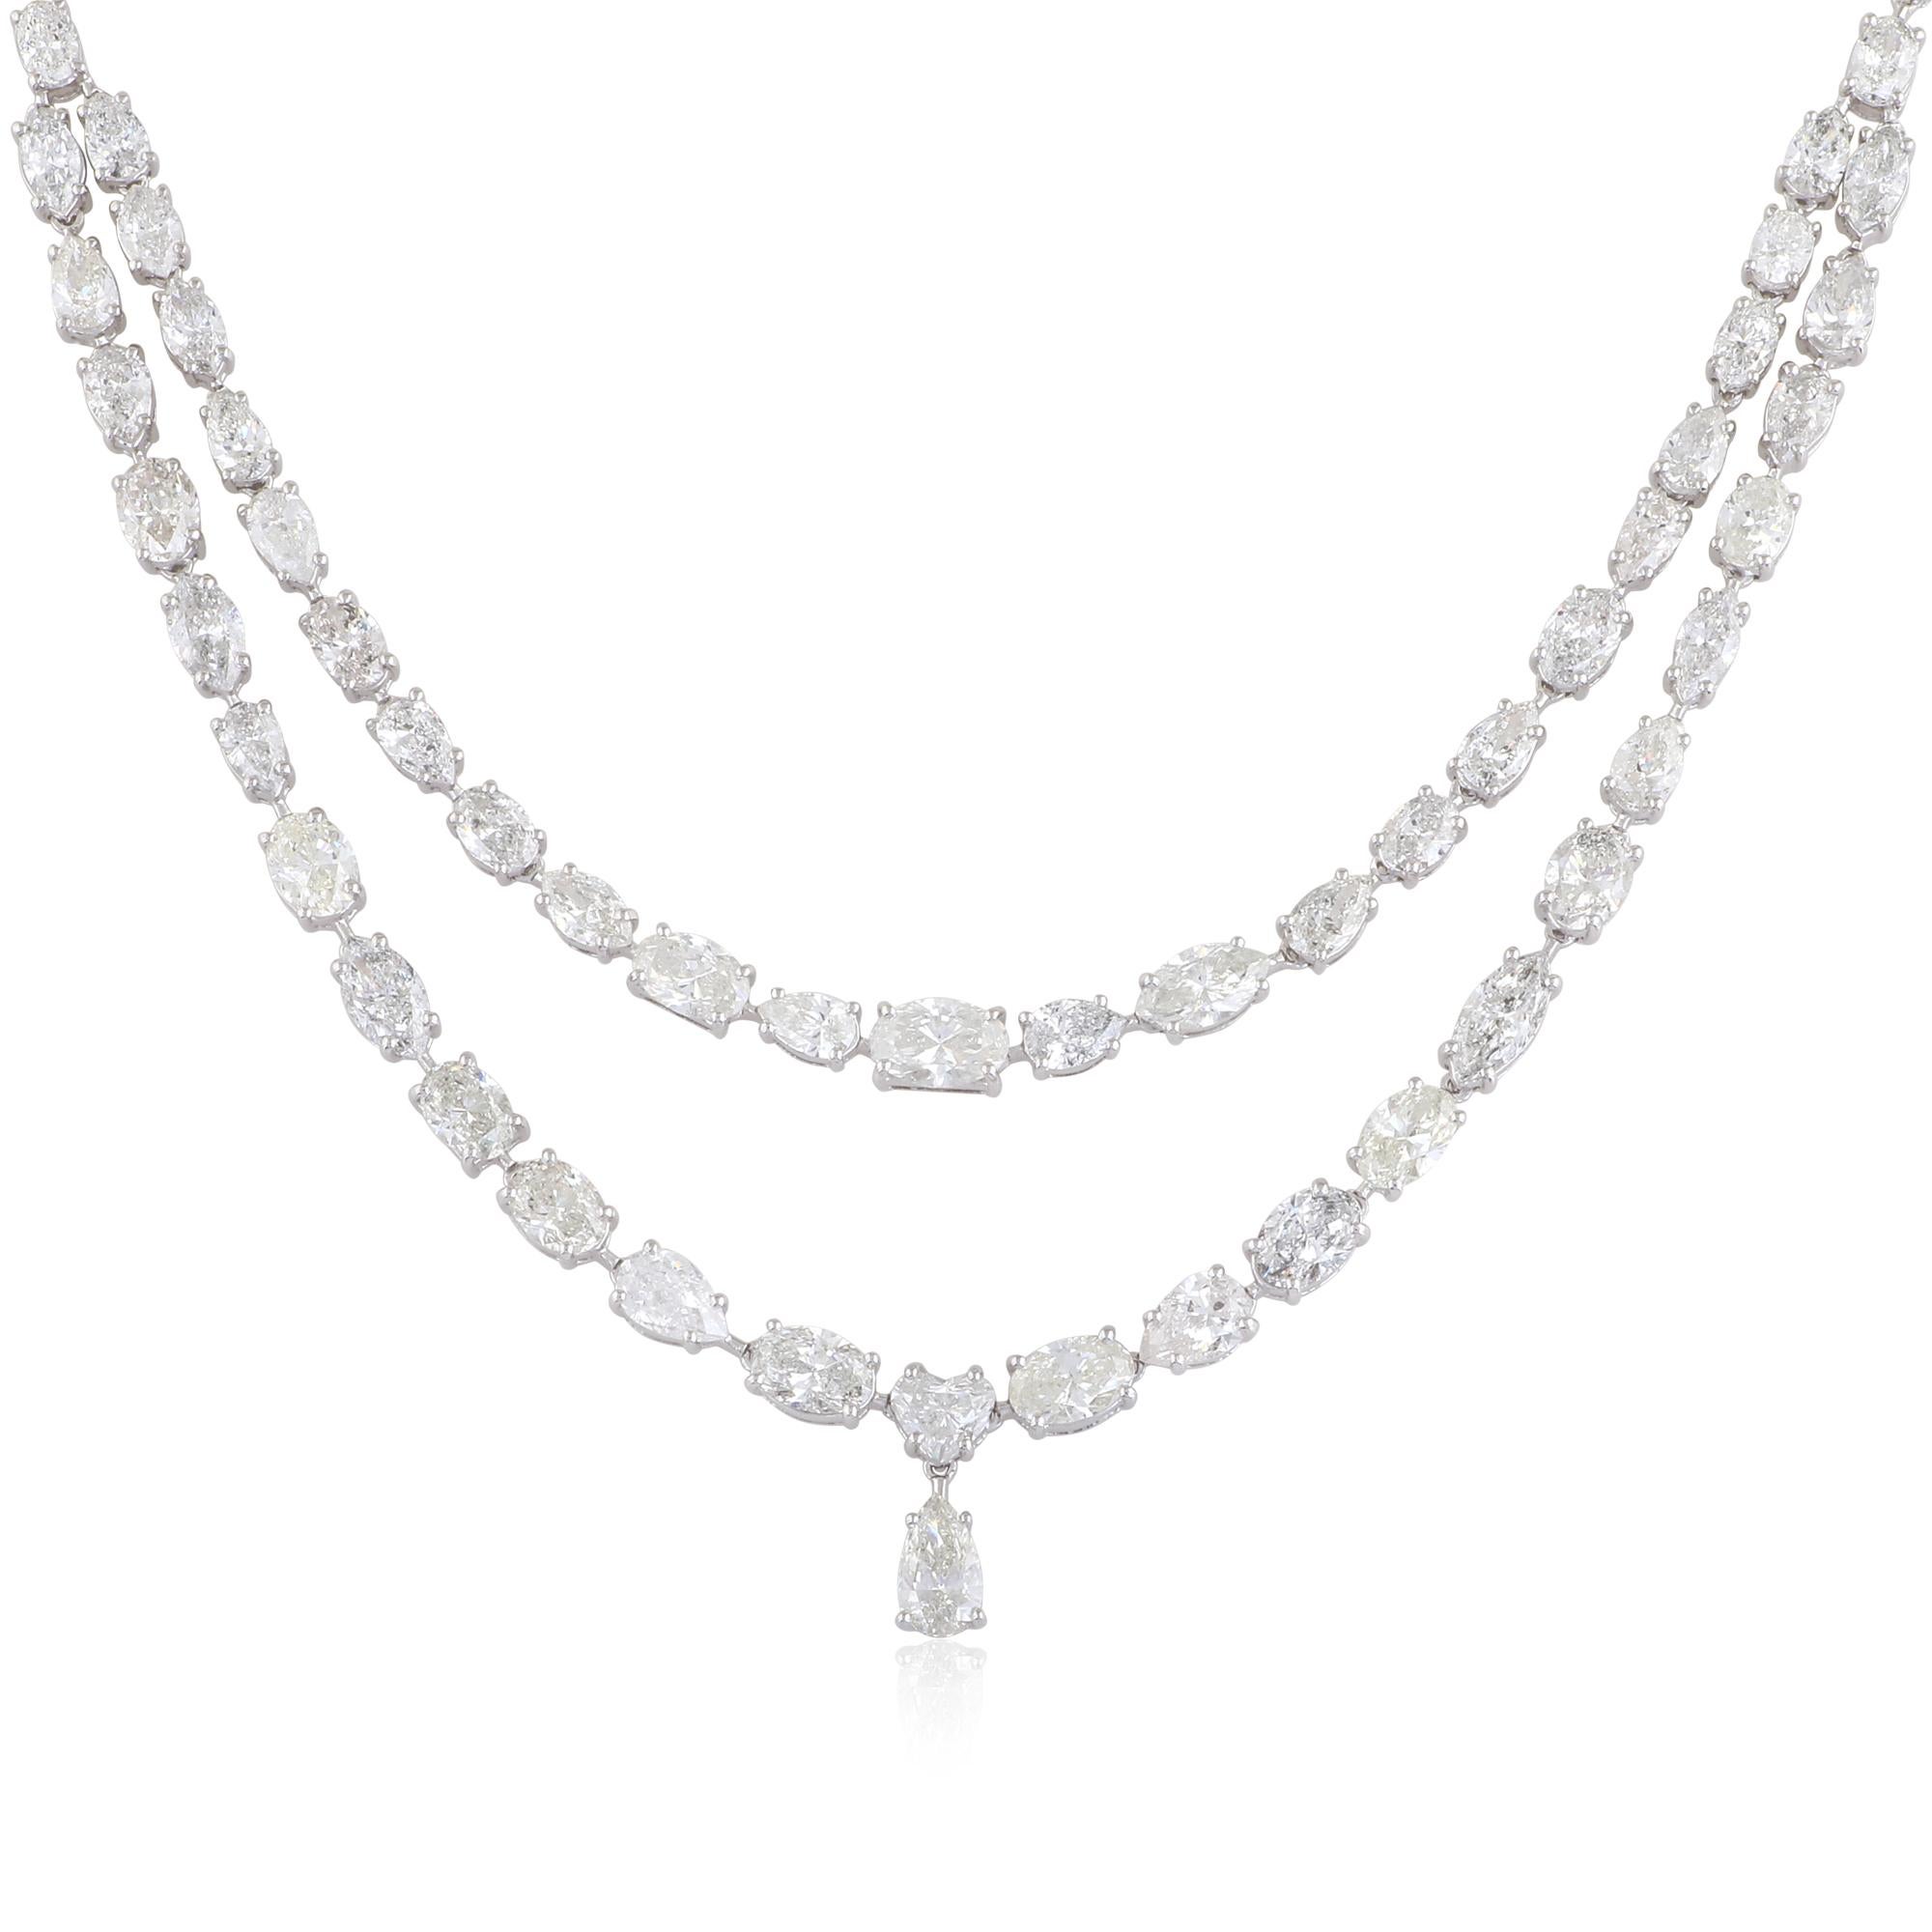 This diamond necklace is a versatile accessory that adds glamour and sophistication to any ensemble. Whether worn for a special occasion or to elevate everyday attire, it exudes elegance and refinement. The length of the necklace is designed to sit